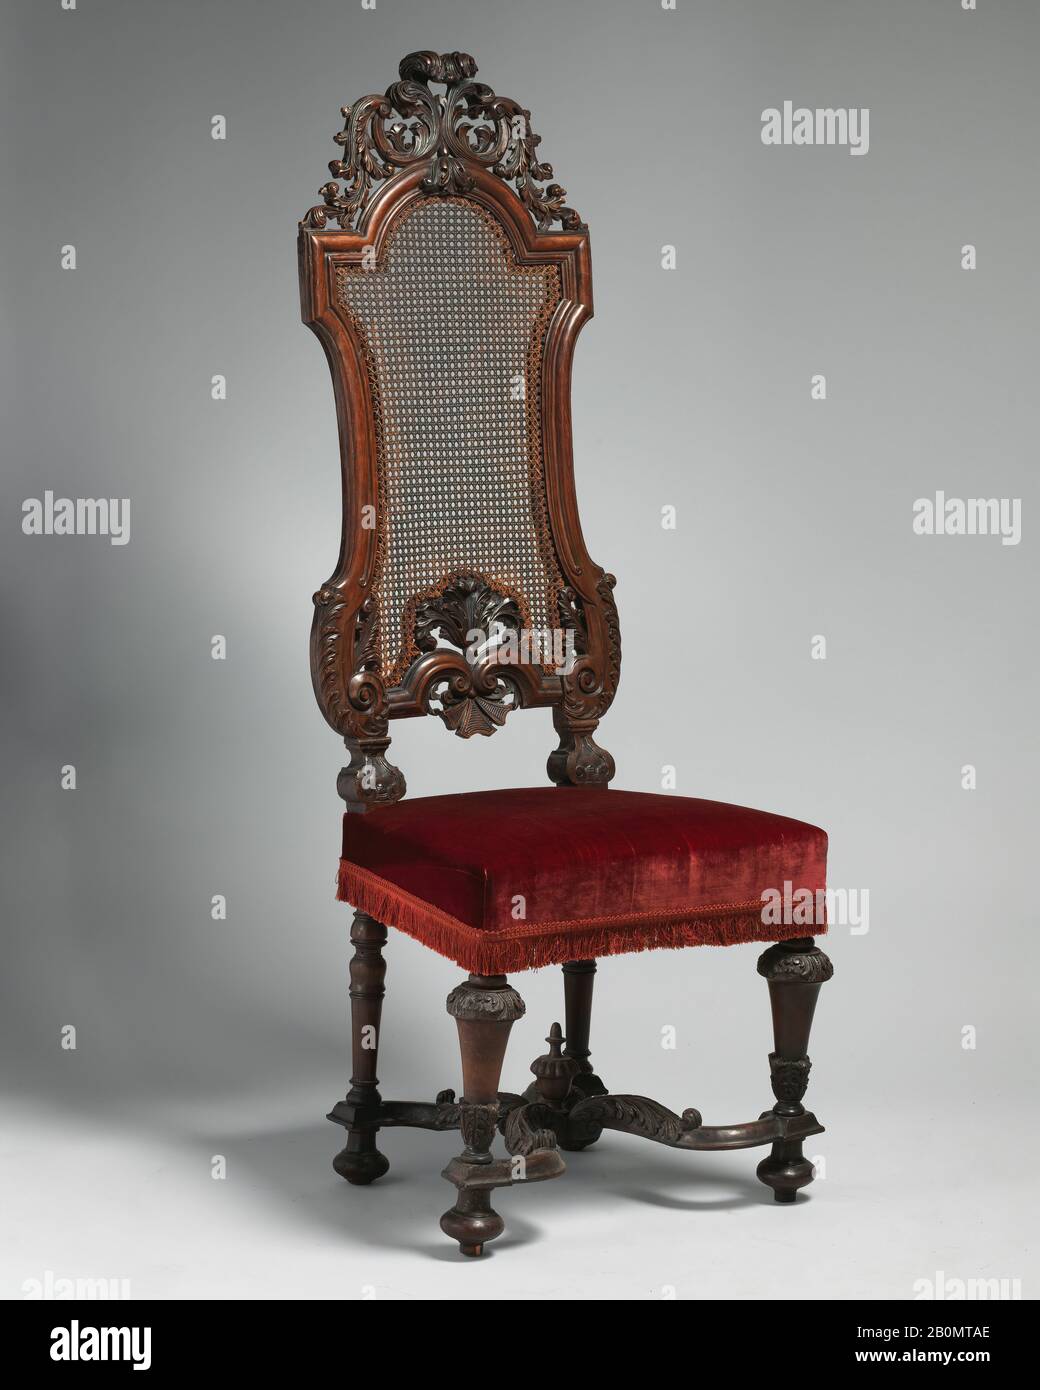 Chair (one of a set of six), British, ca. 1695, British, Walnut, caning; velvet not original to frame, Overall: 55 1/4 × 20 1/4 × 17 in. (140.3 × 51.4 × 43.2 cm), Woodwork-Furniture Stock Photo